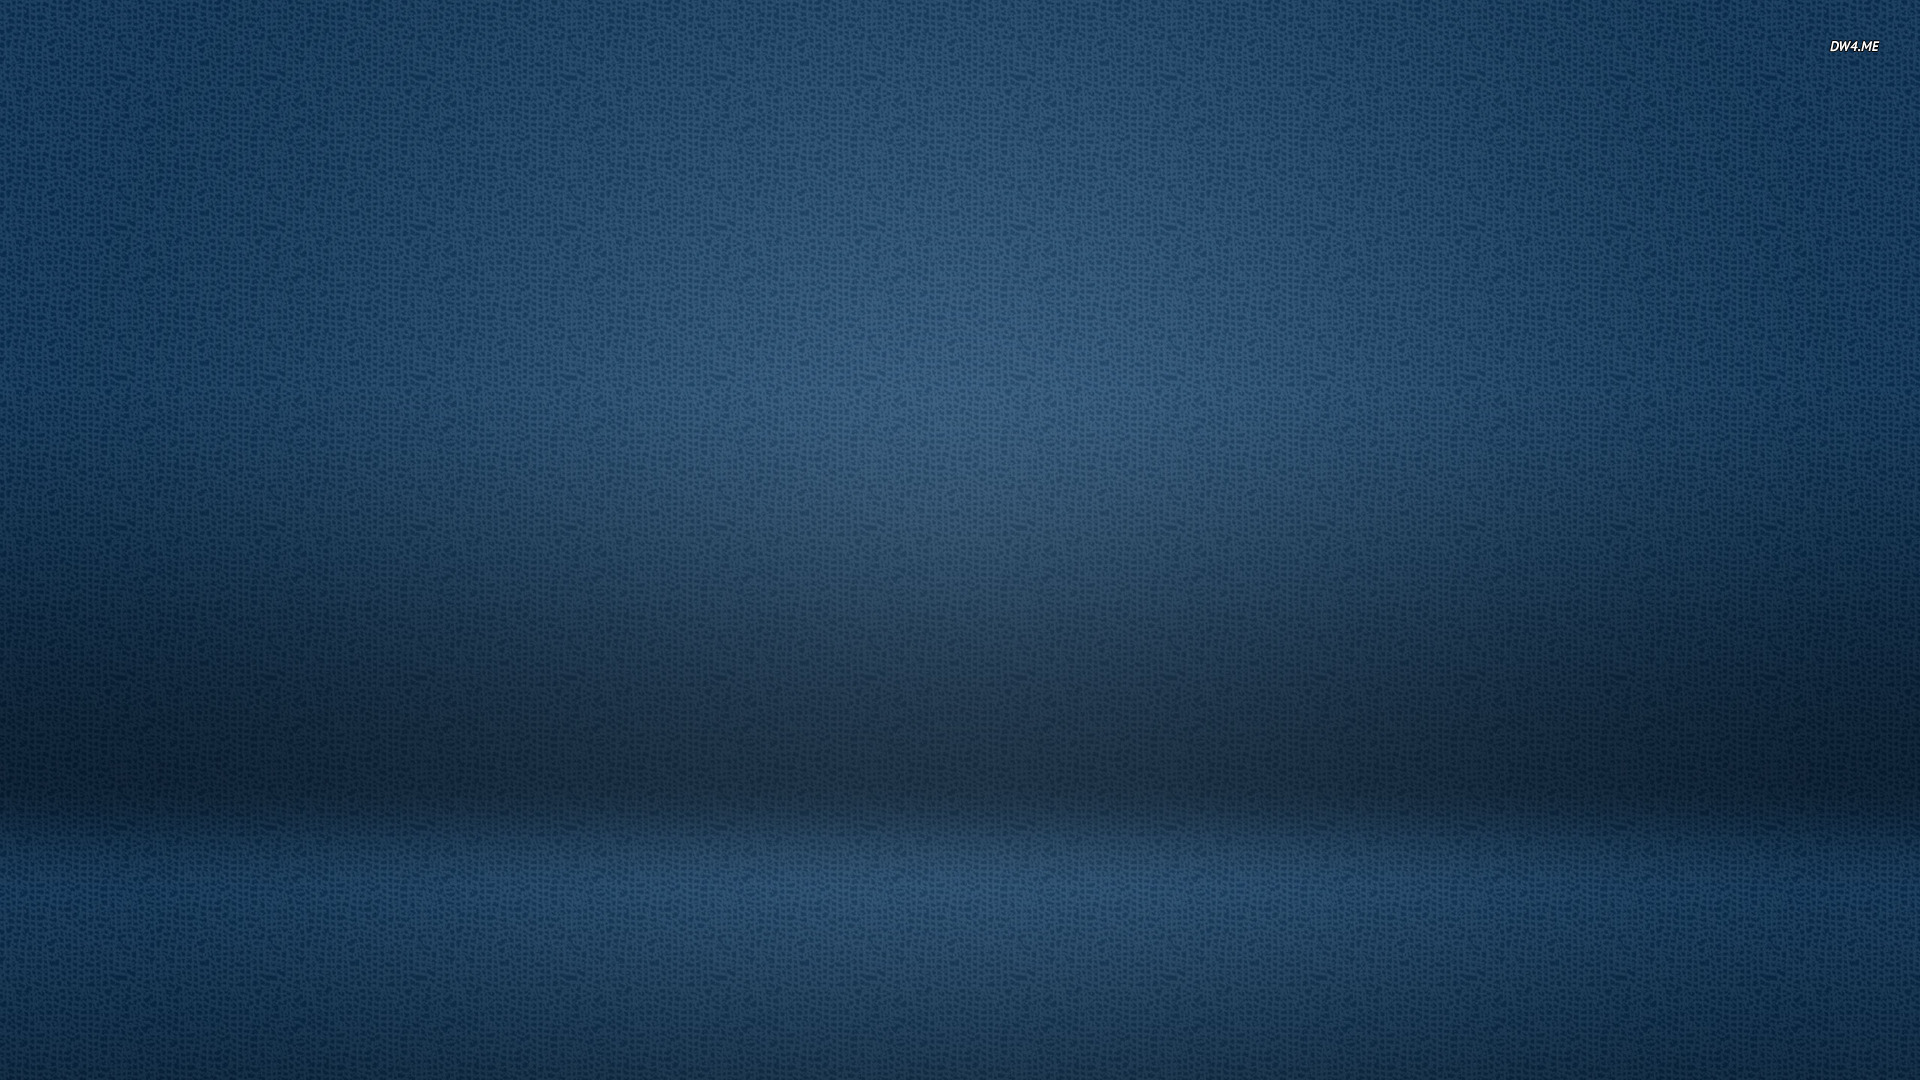 Android blue pattern wallpaper   585705 1920x1080